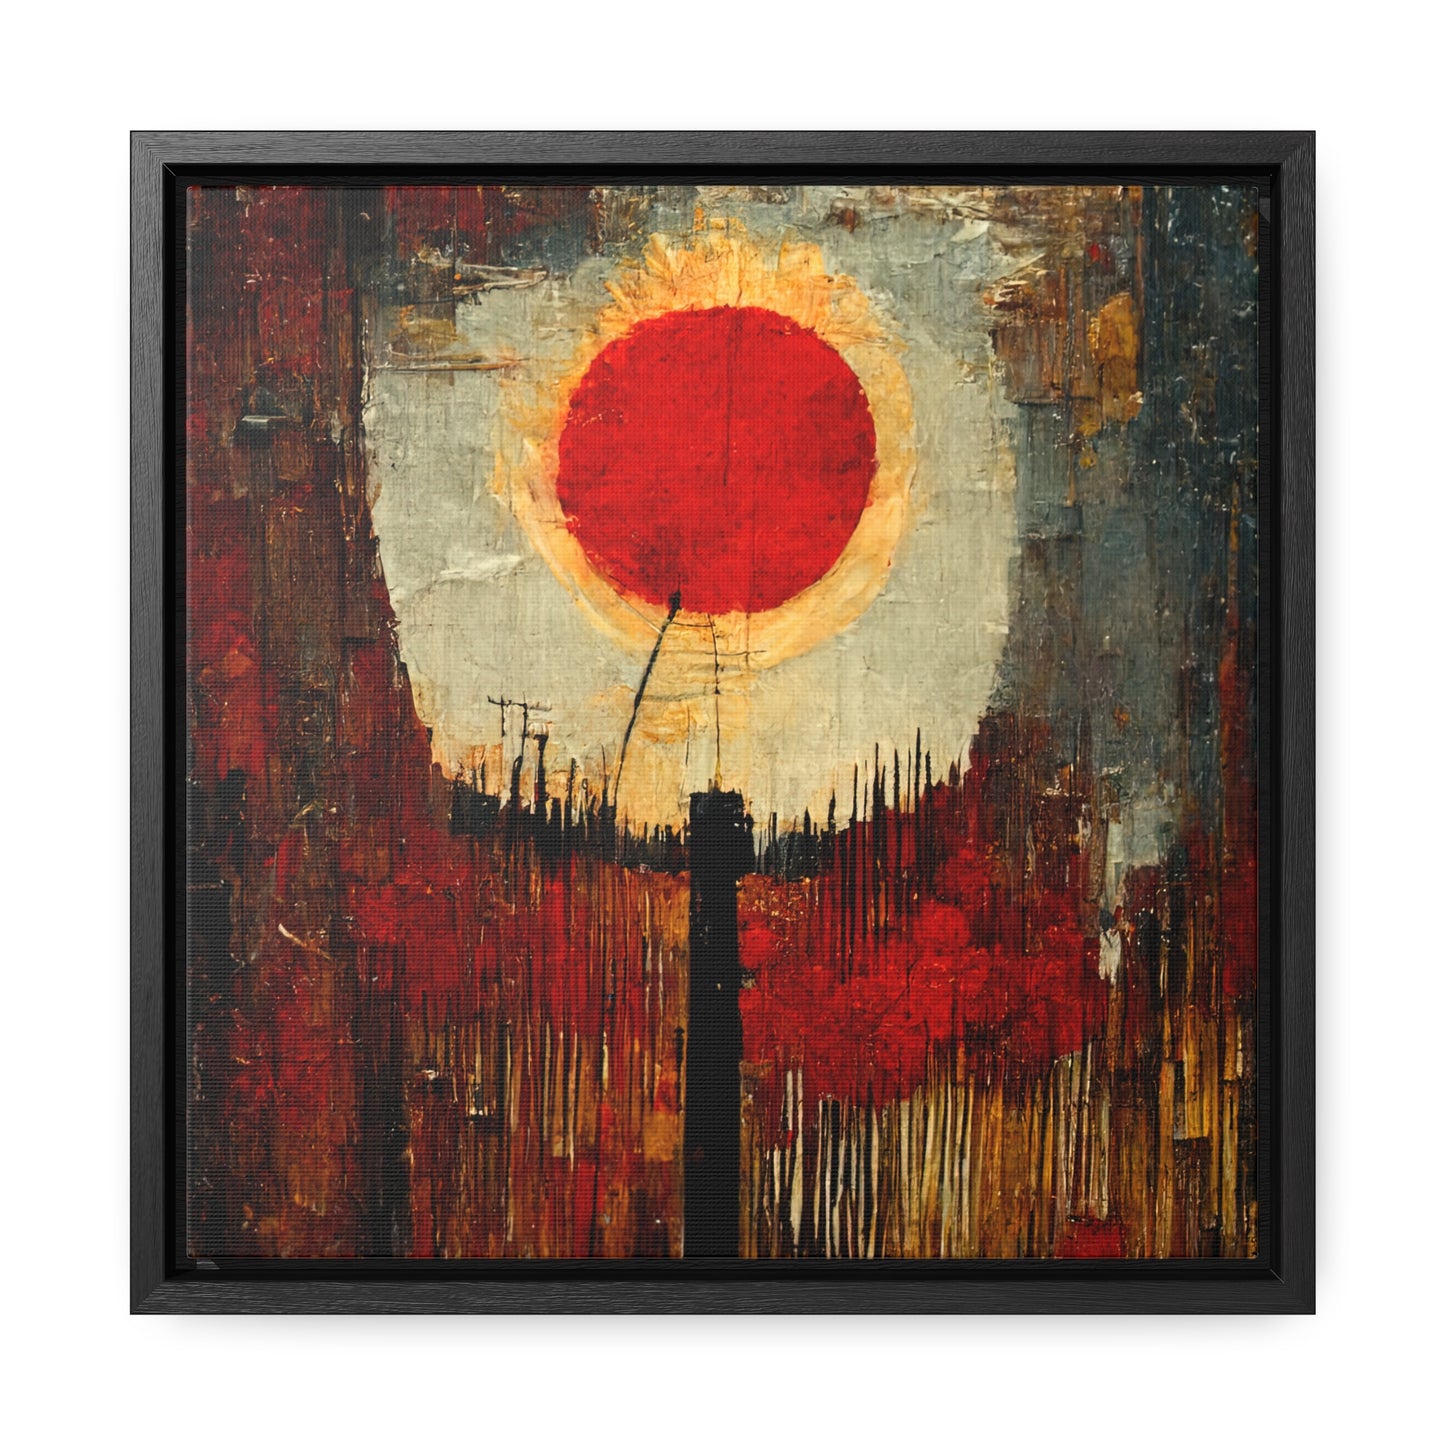 Land of the Sun 29, Valentinii, Gallery Canvas Wraps, Square Frame